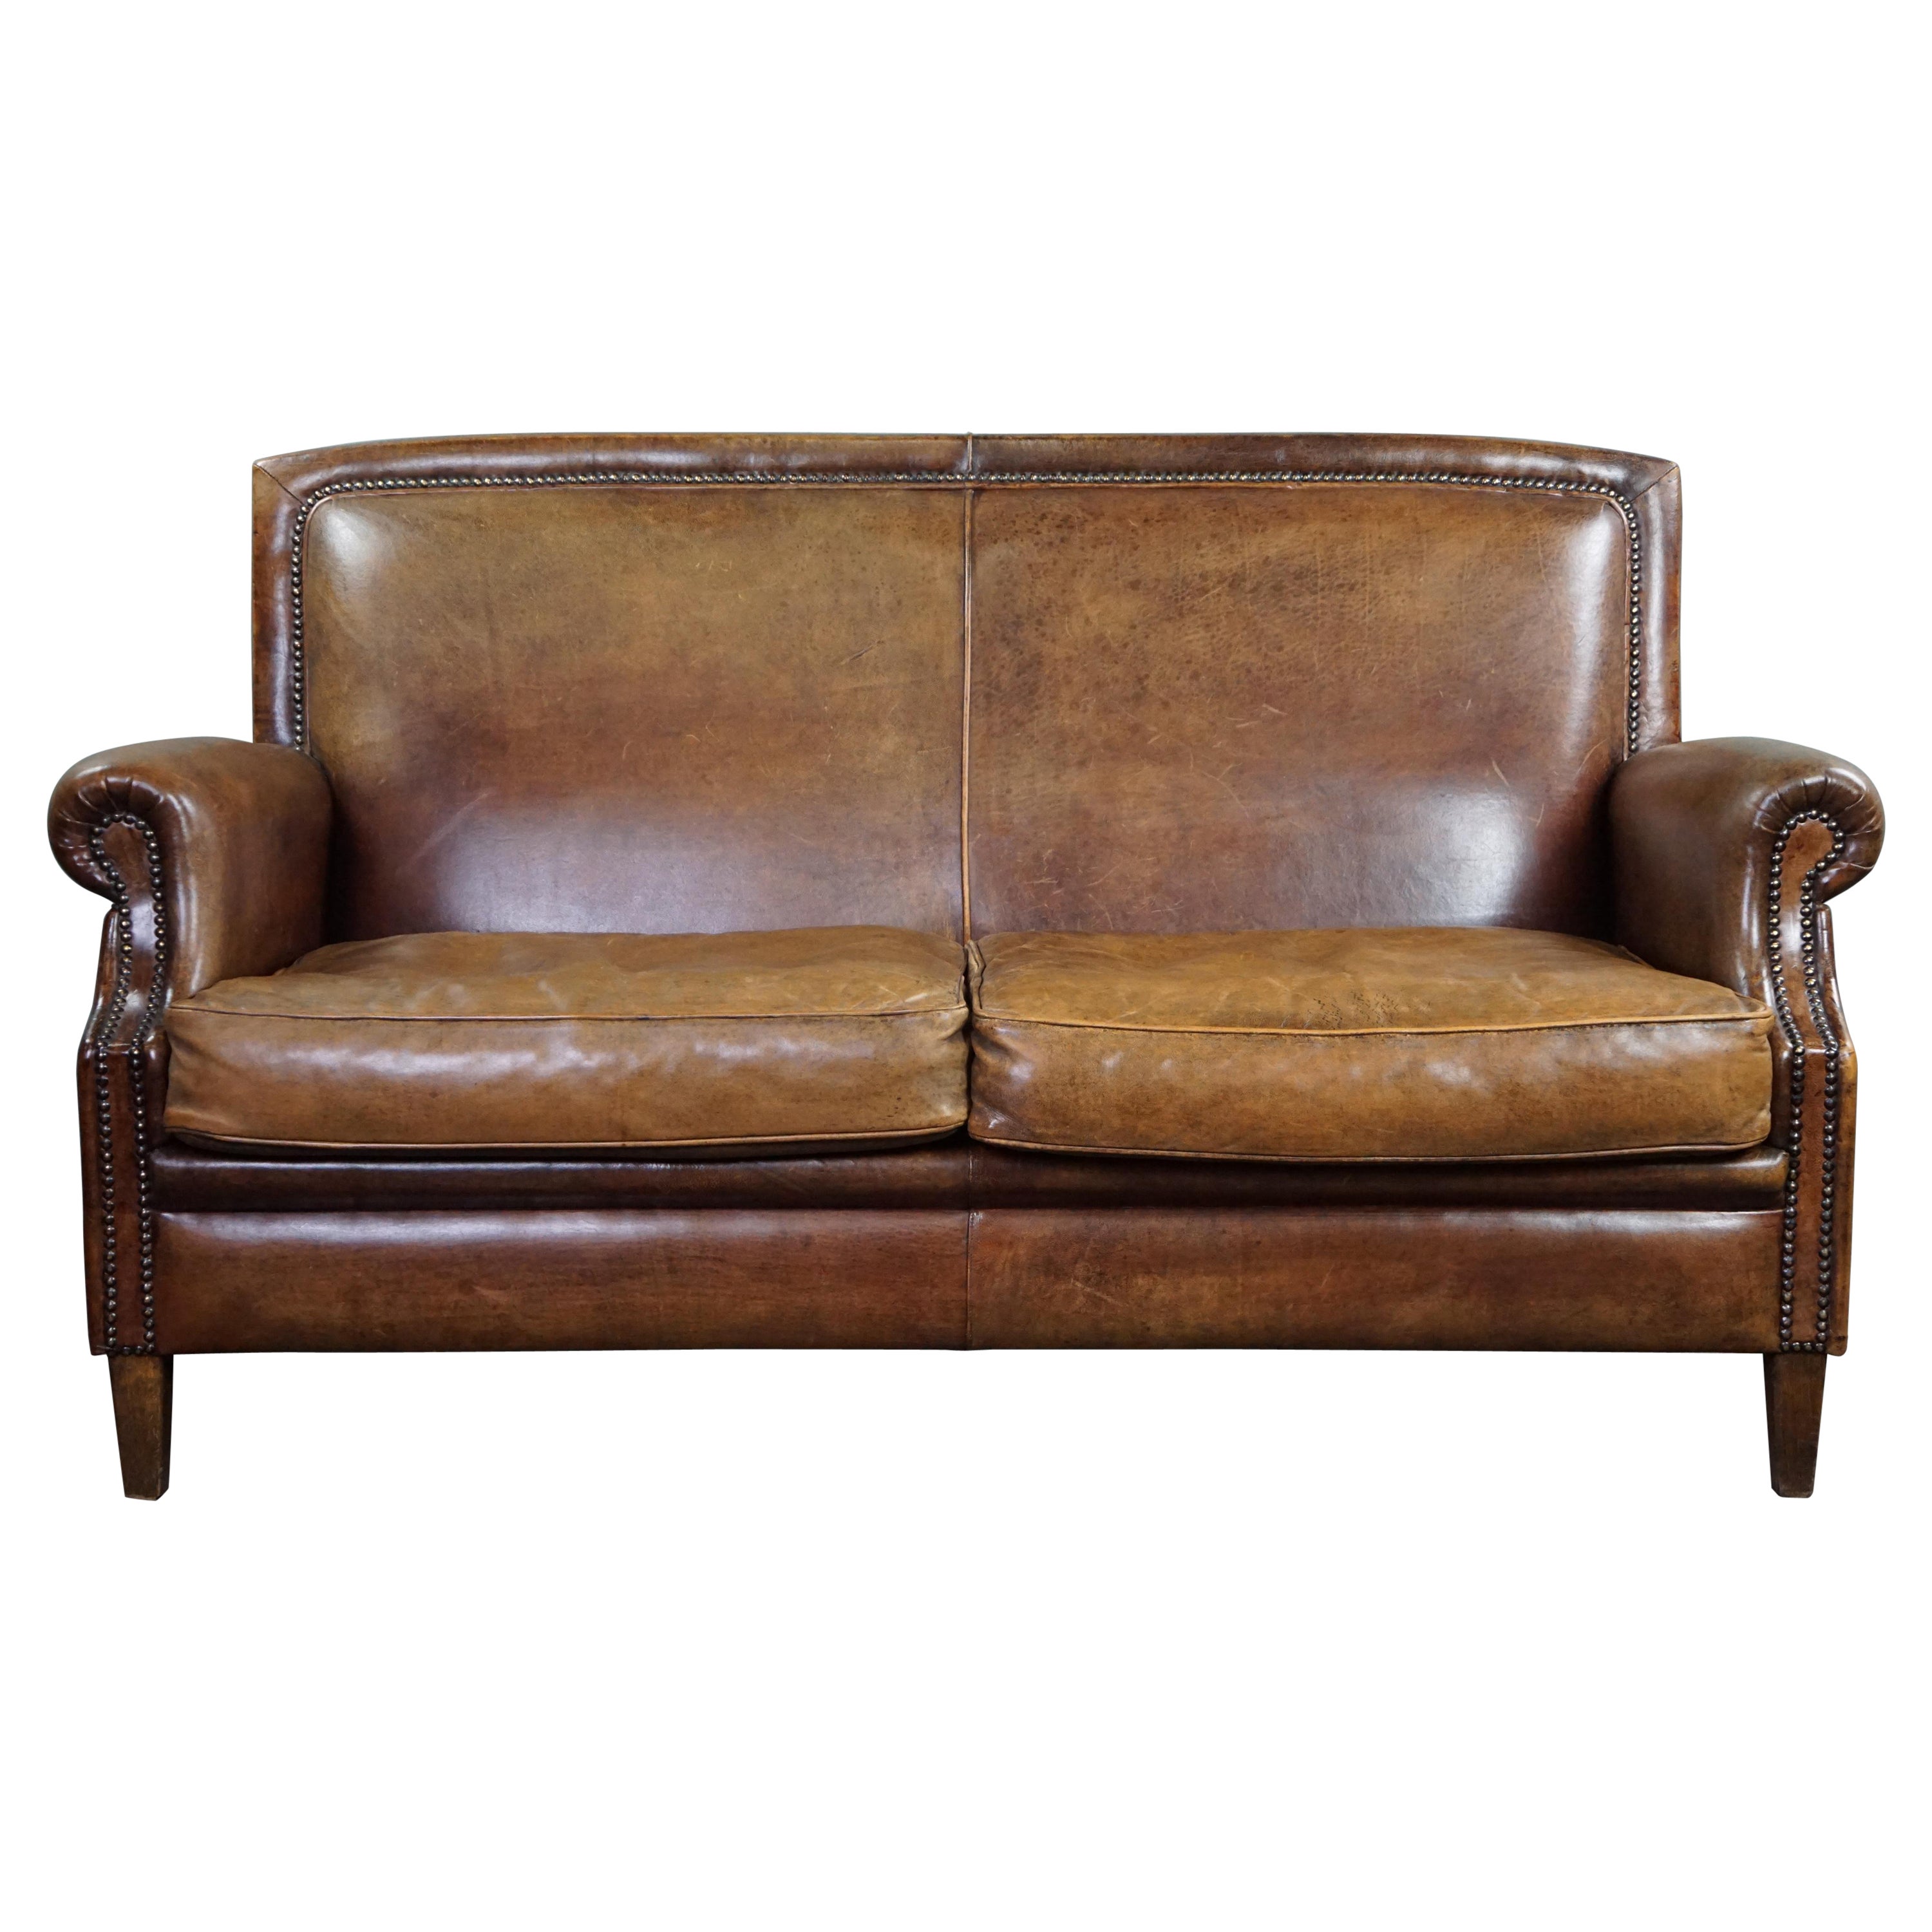 Well-fitting Spacious Sheepskin Leather 2-Seater Sofa For Sale